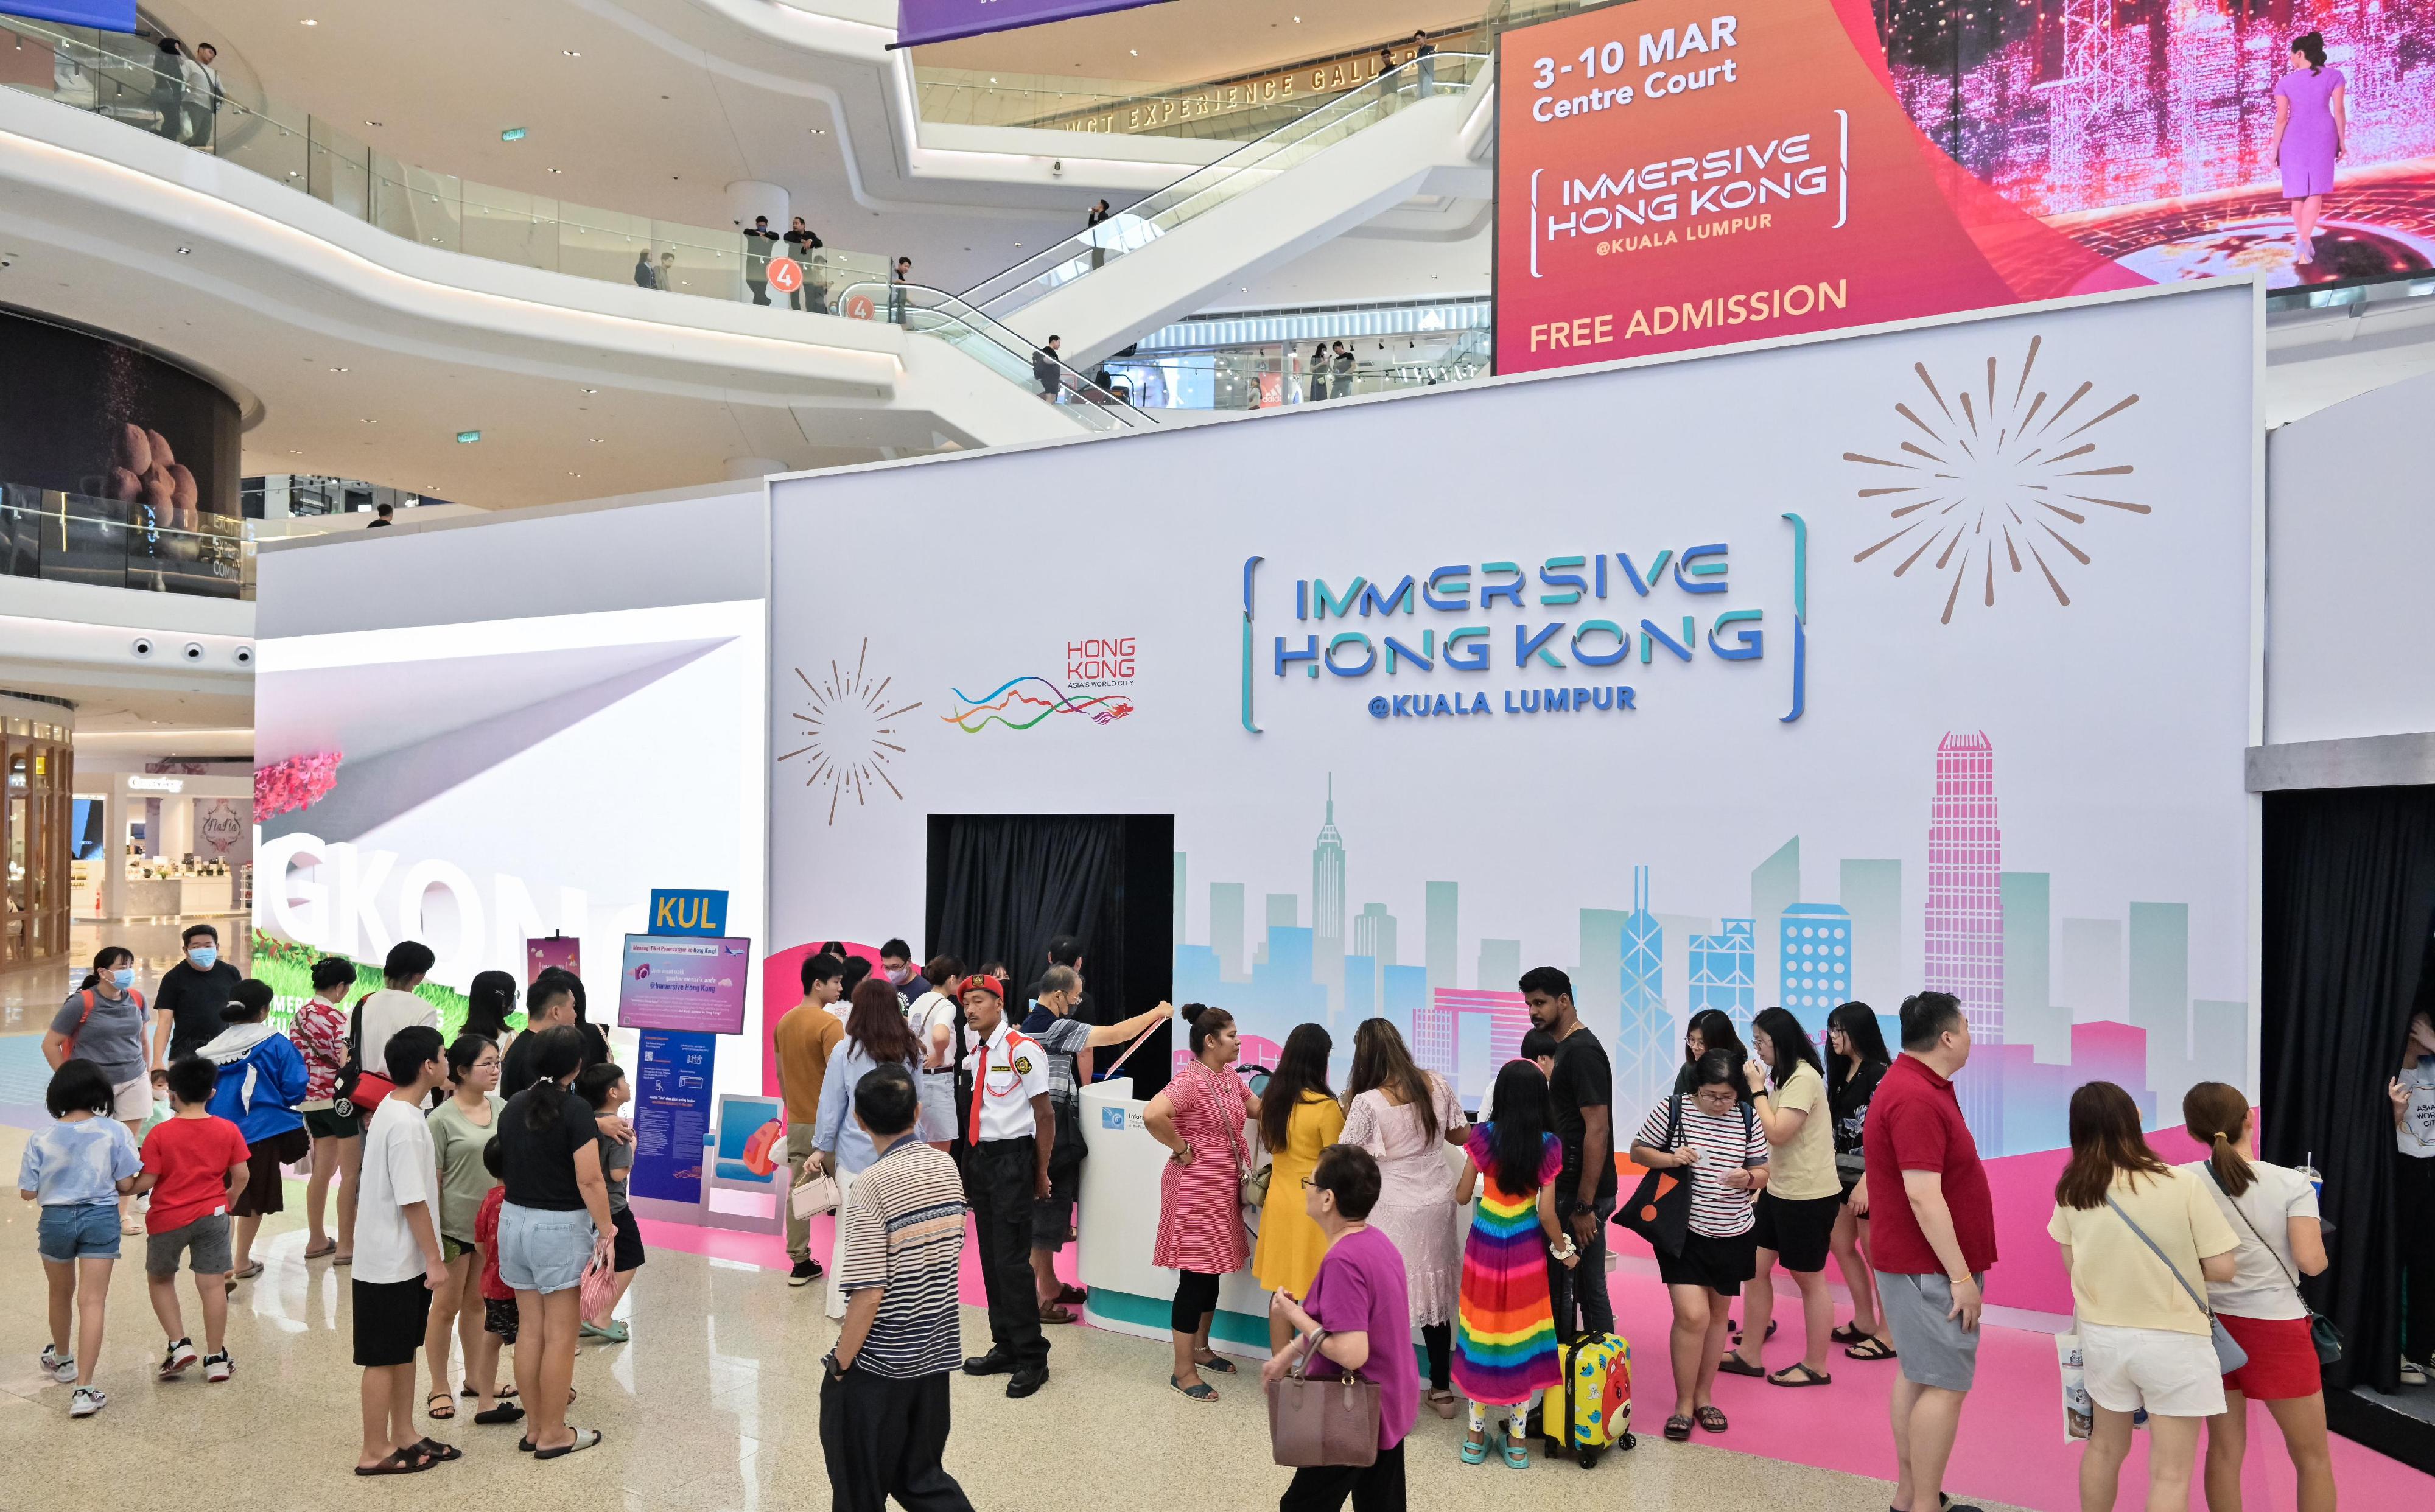 The "Immersive Hong Kong" roving exhibition, which showcases Hong Kong's unique strengths, advantages and opportunities with art technology, was launched in Kuala Lumpur, Malaysia, today (March 3) as part of a promotional campaign in Association of Southeast Asian Nations countries. The exhibition will run at Pavilion Bukit Jalil, a major shopping centre in Kuala Lumpur, until March 10. 